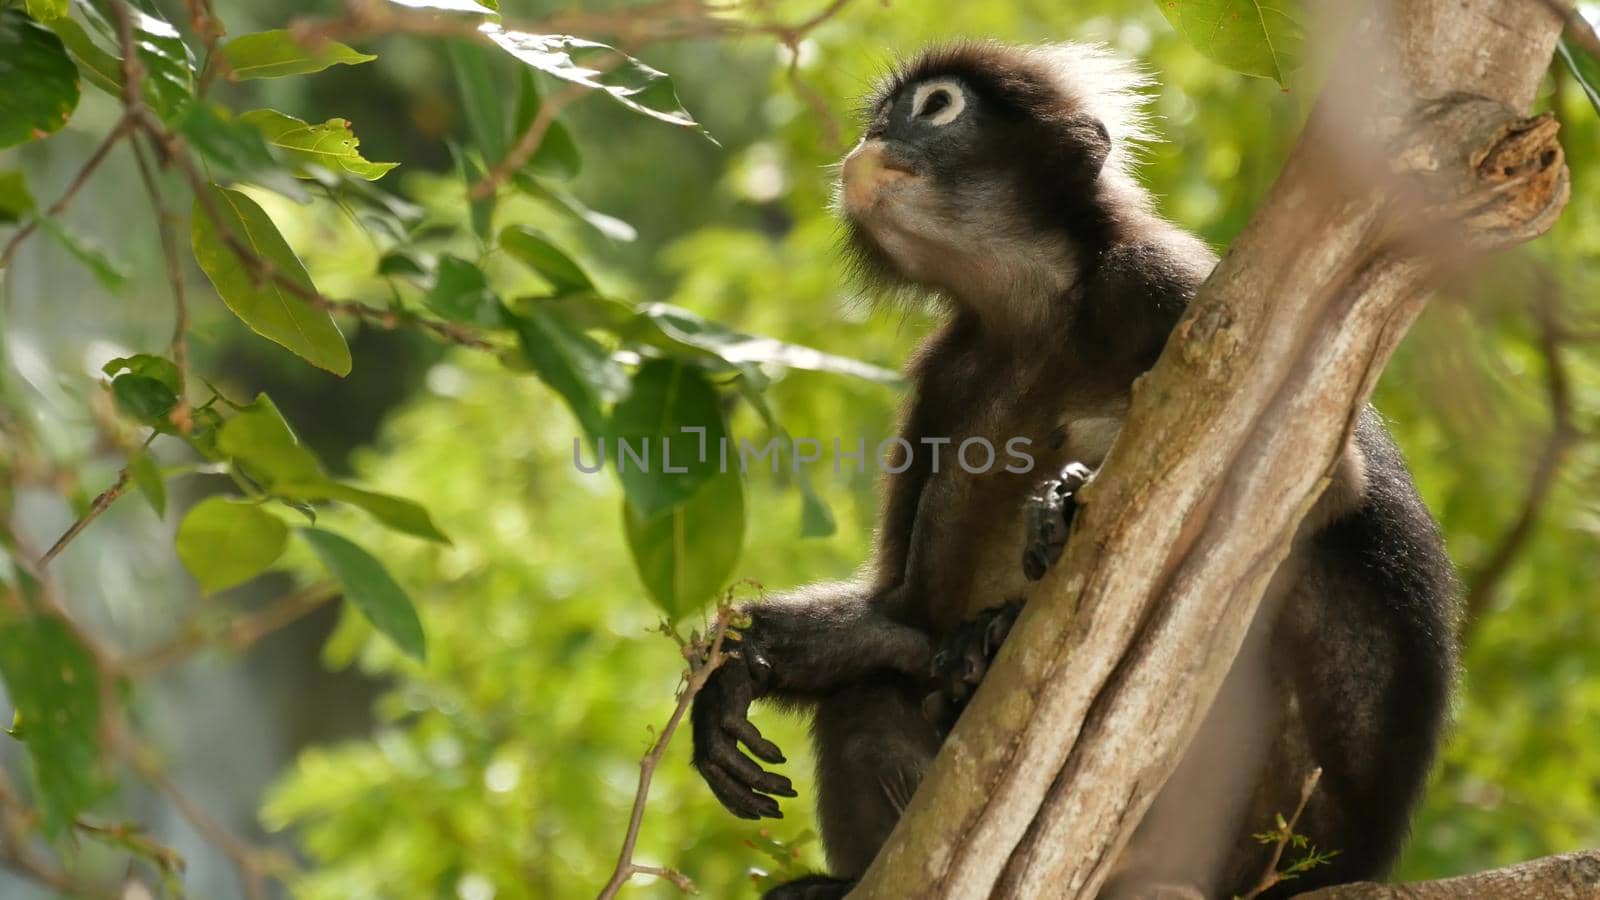 Cute spectacled leaf langur, dusky monkey on tree branch amidst green leaves in Ang Thong national park in natural habitat. Wildlife of endangered species of animals. Environment conservation concept.